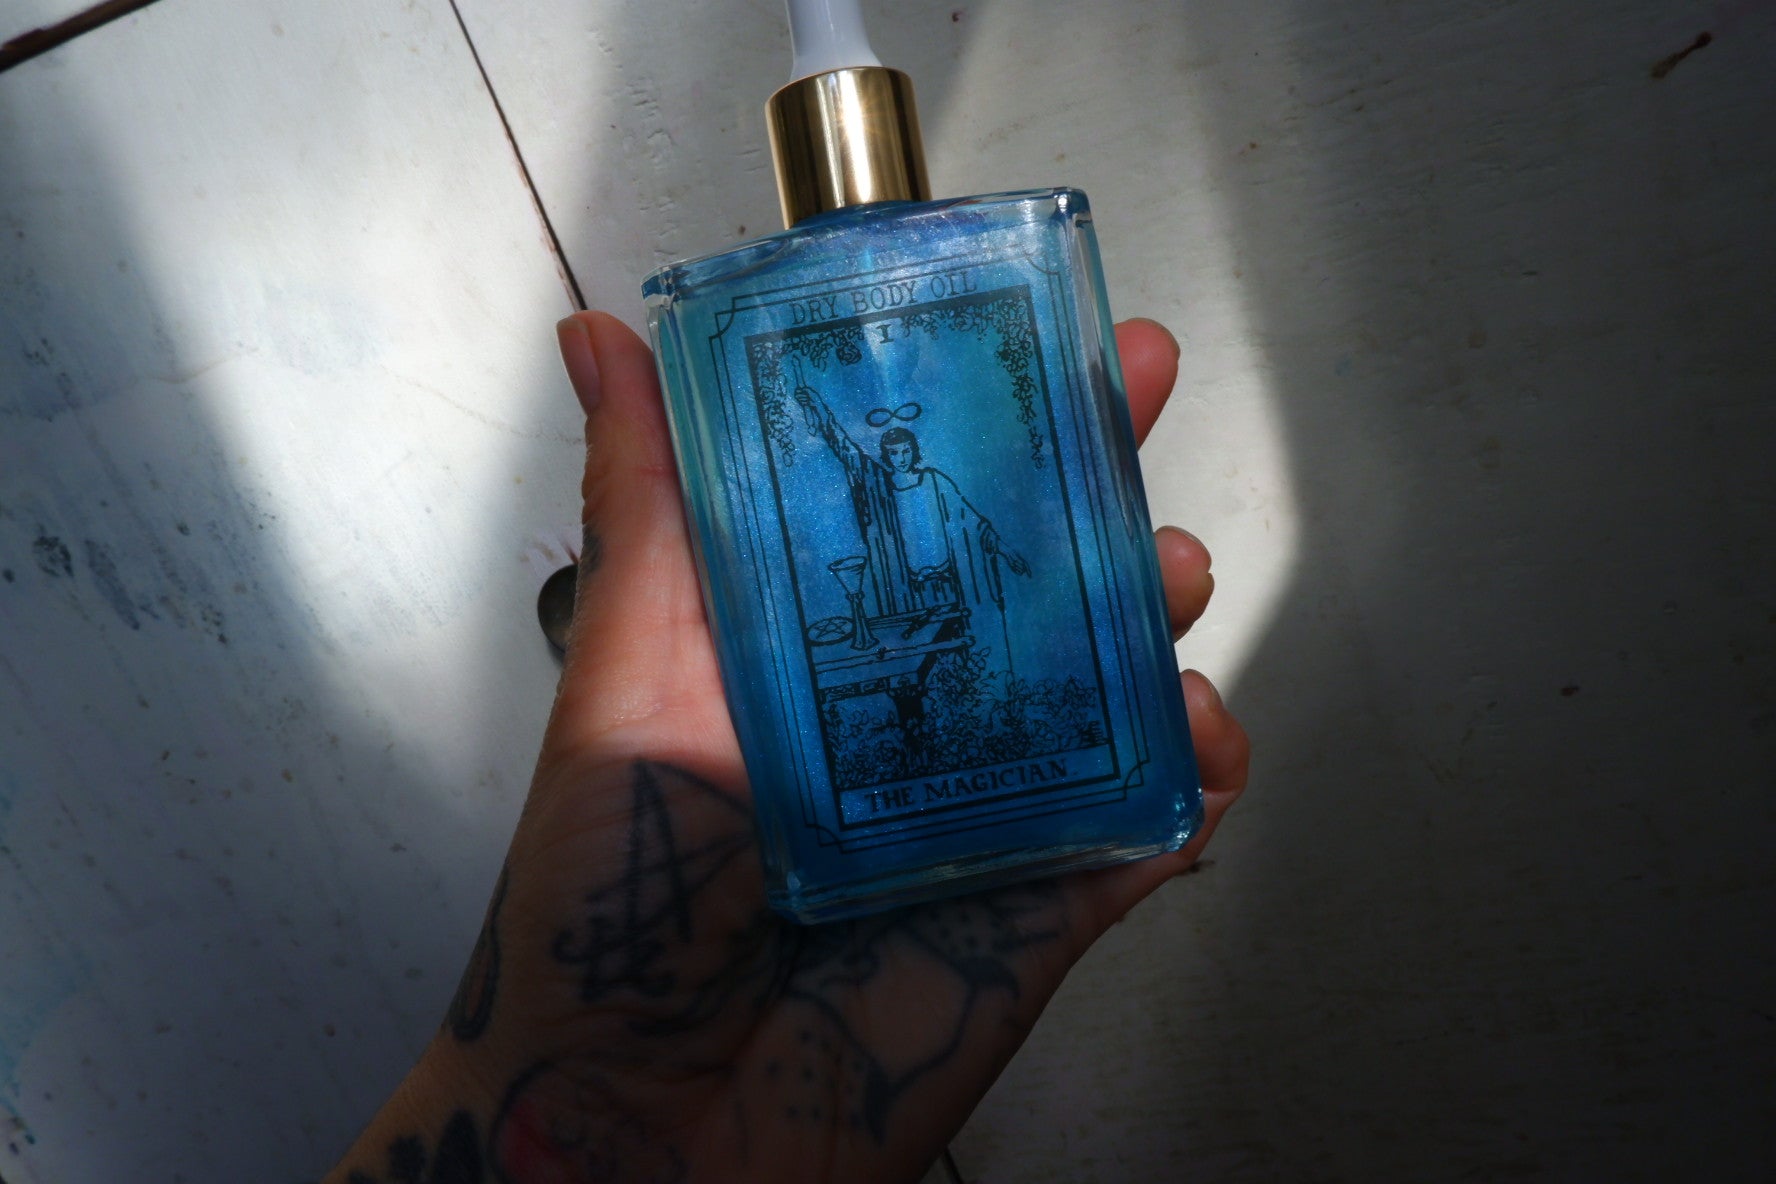 THE MAGICIAN Dry Body Oil